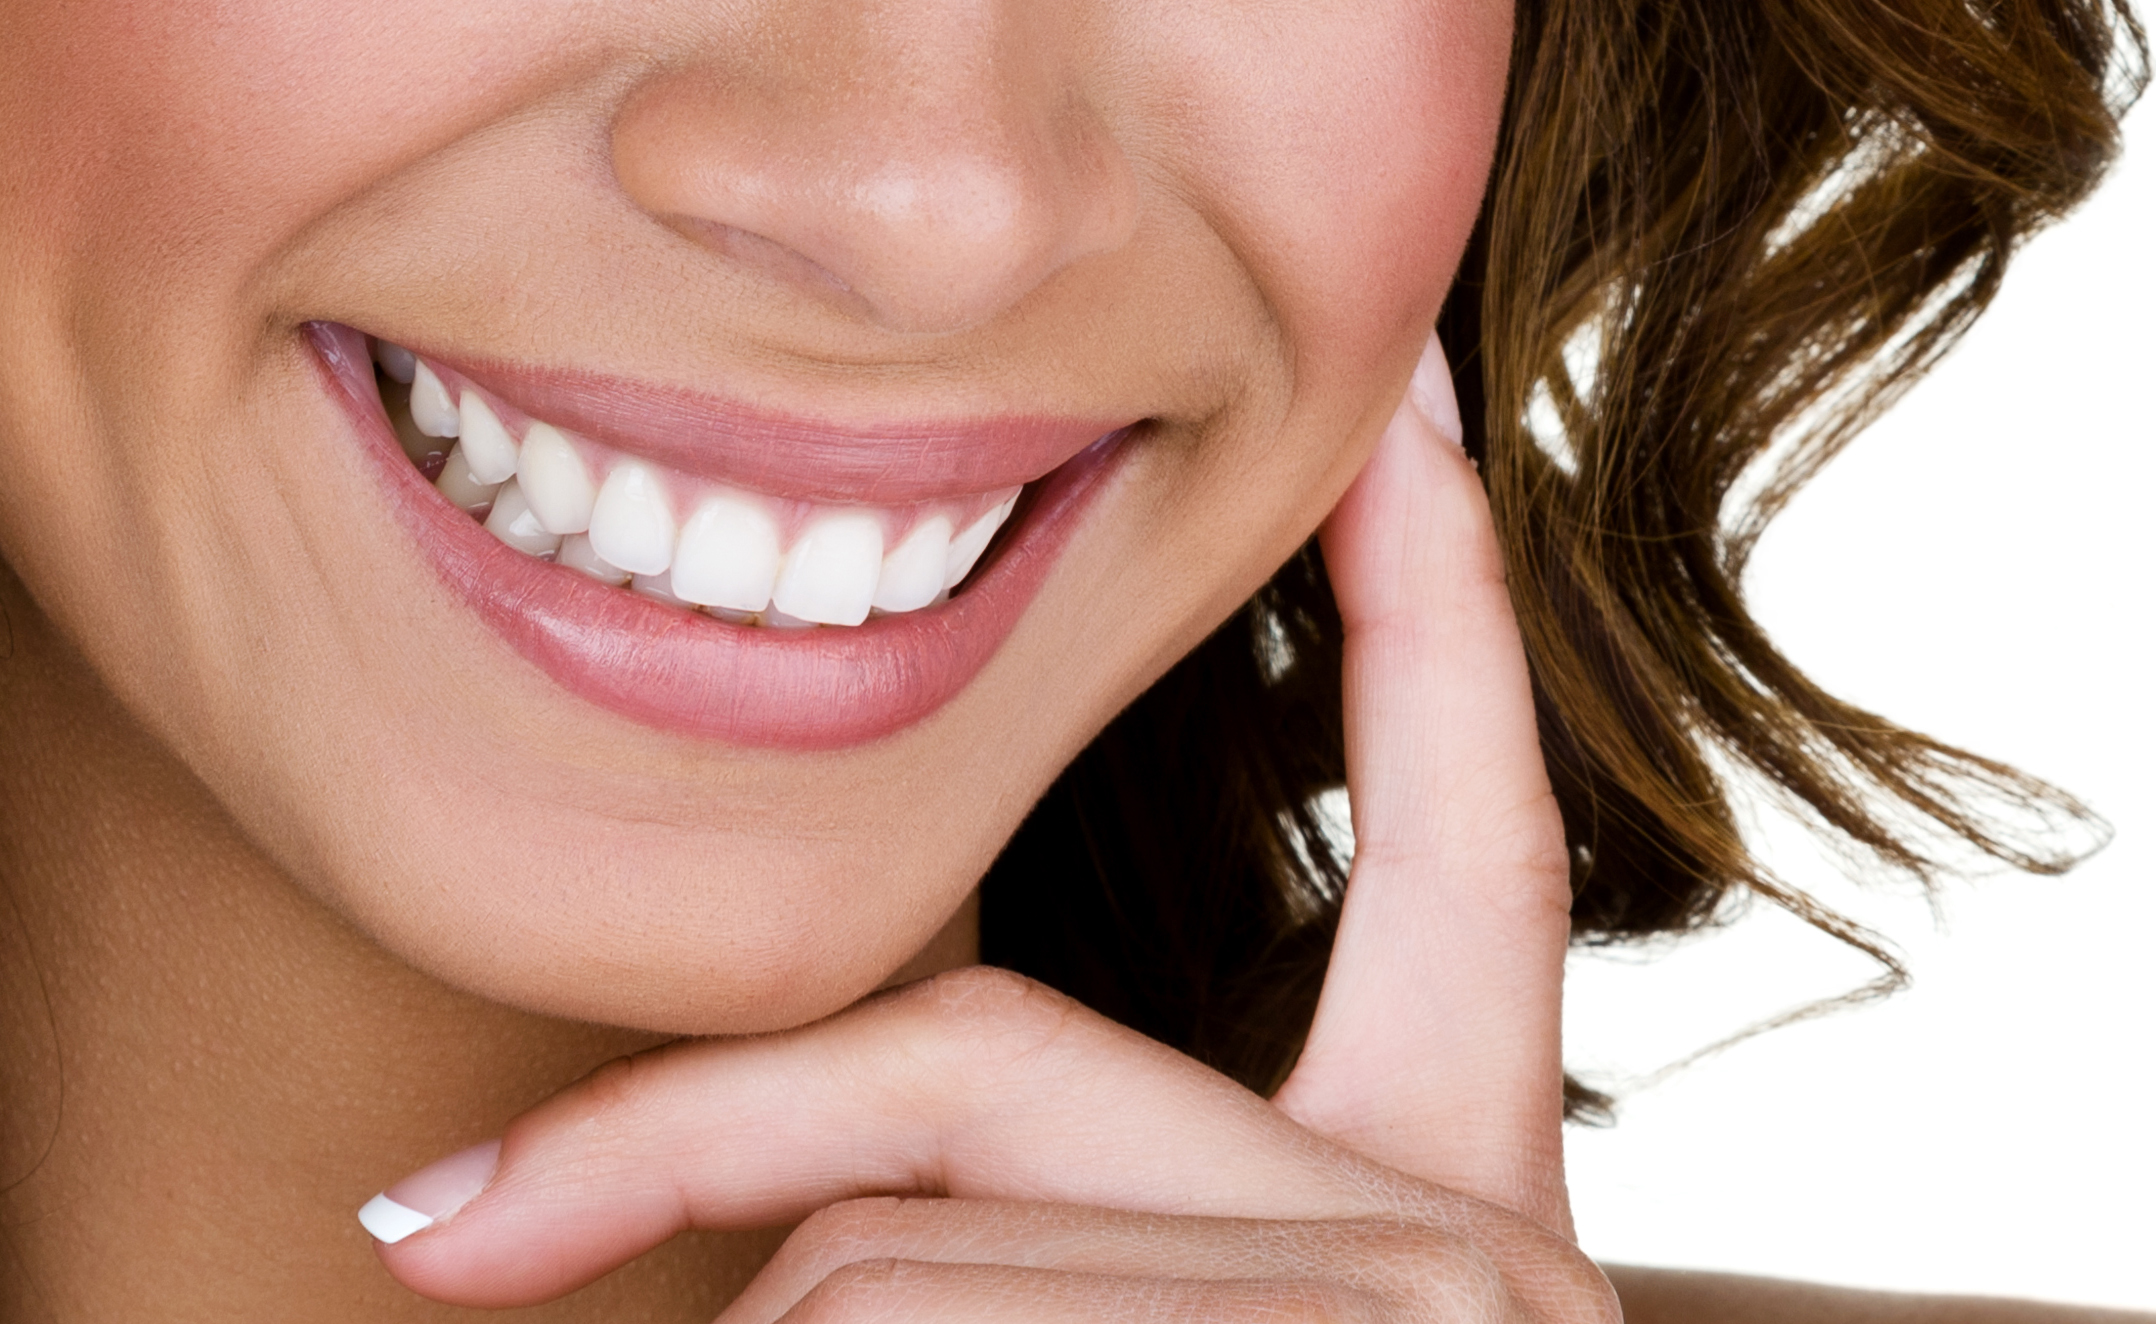 There are essentially 2 ways of making the teeth whiter without covering th...